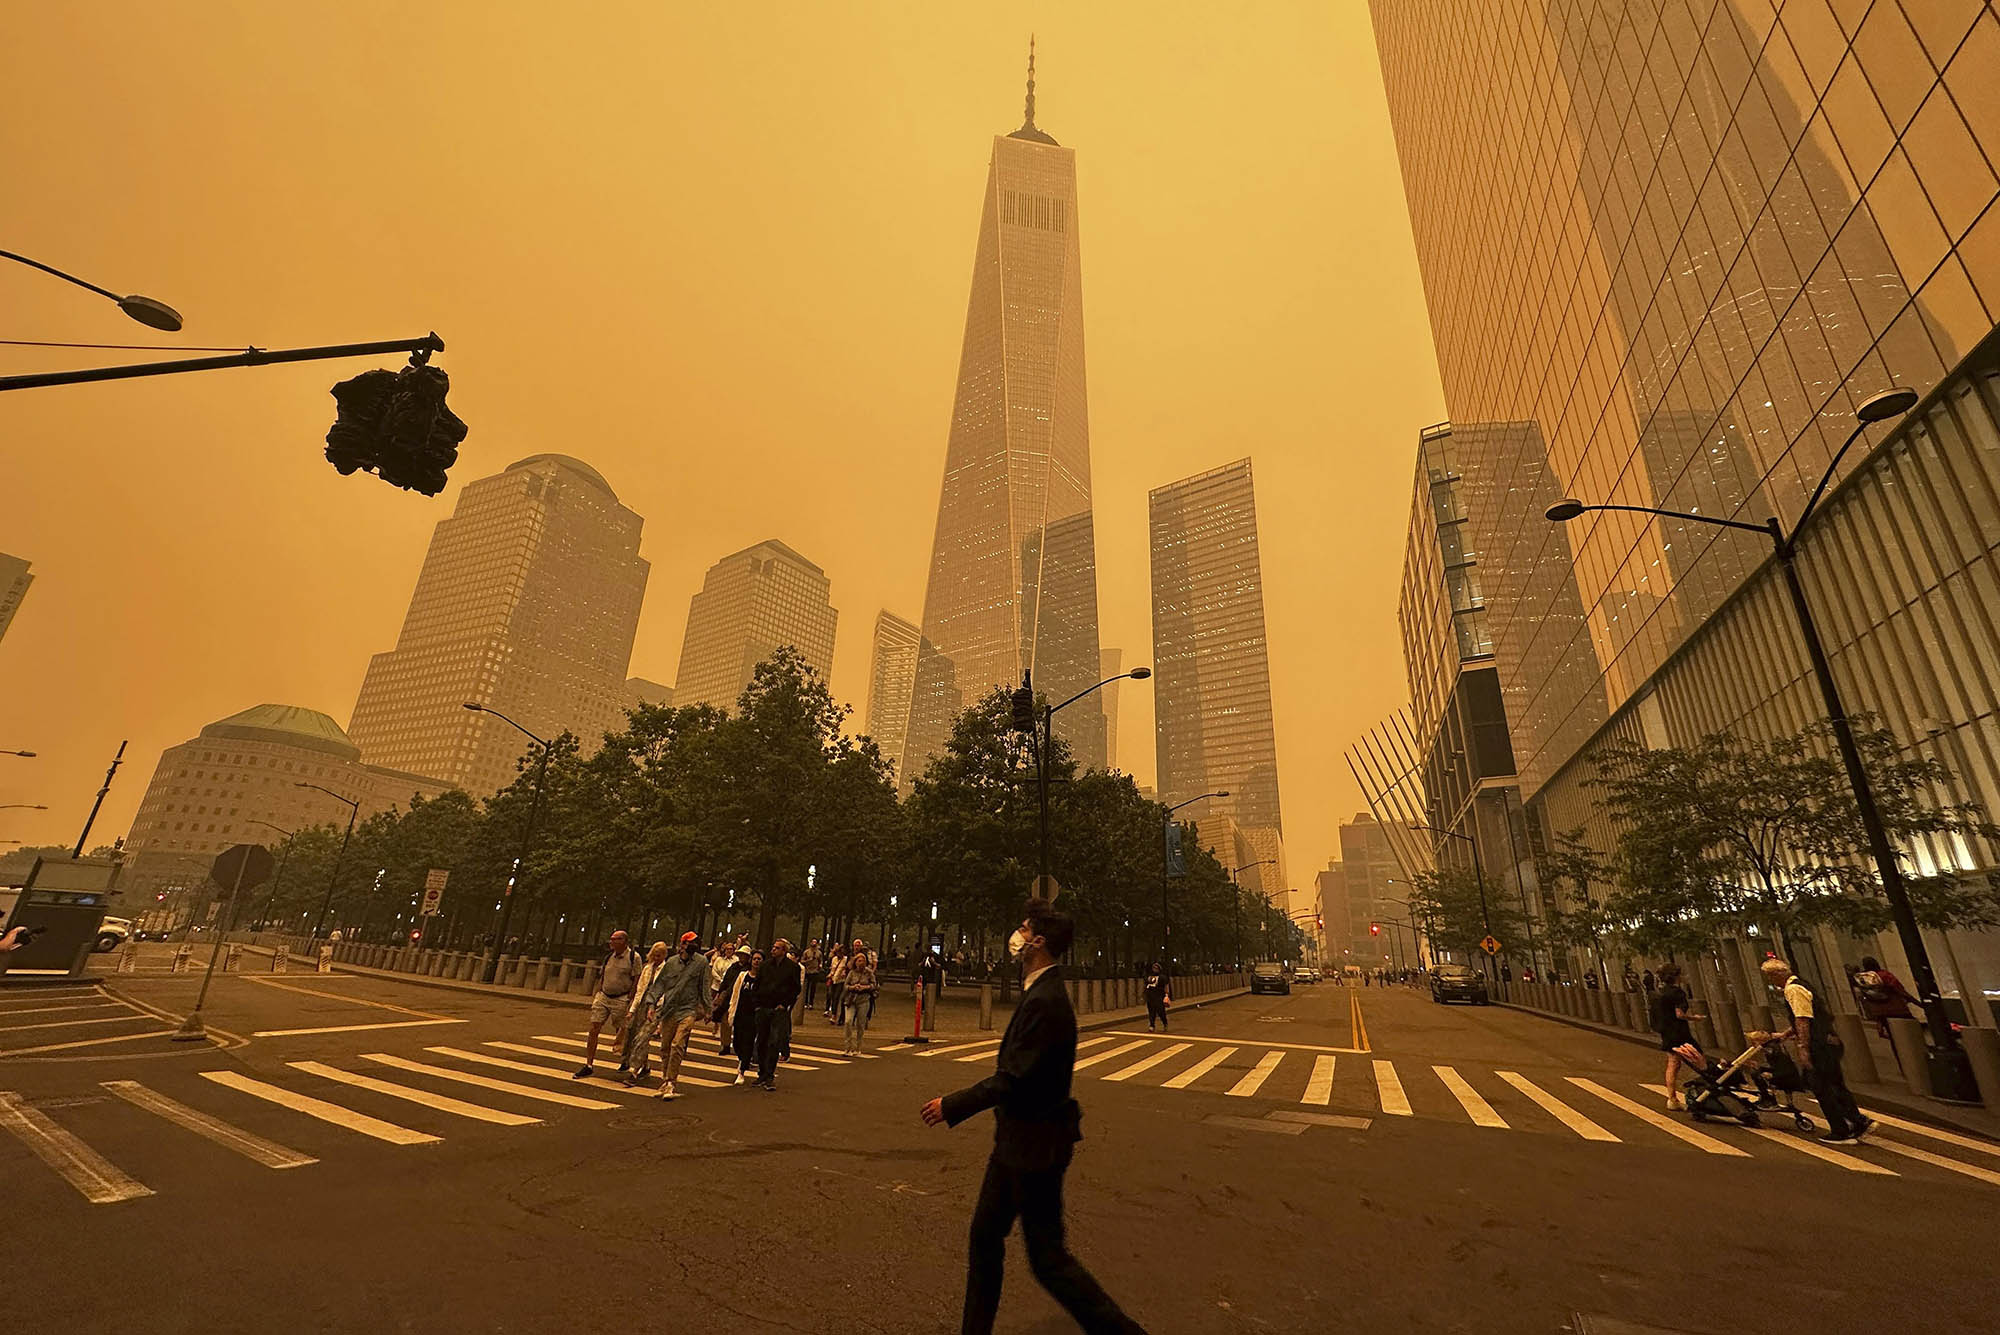 Photo: Pedestrians pass the One World Trade Center, center, amidst a smokey haze from wildfires in Canada. Scene is tinted a sepia-orange as masked pedestrians walk in and around the city.